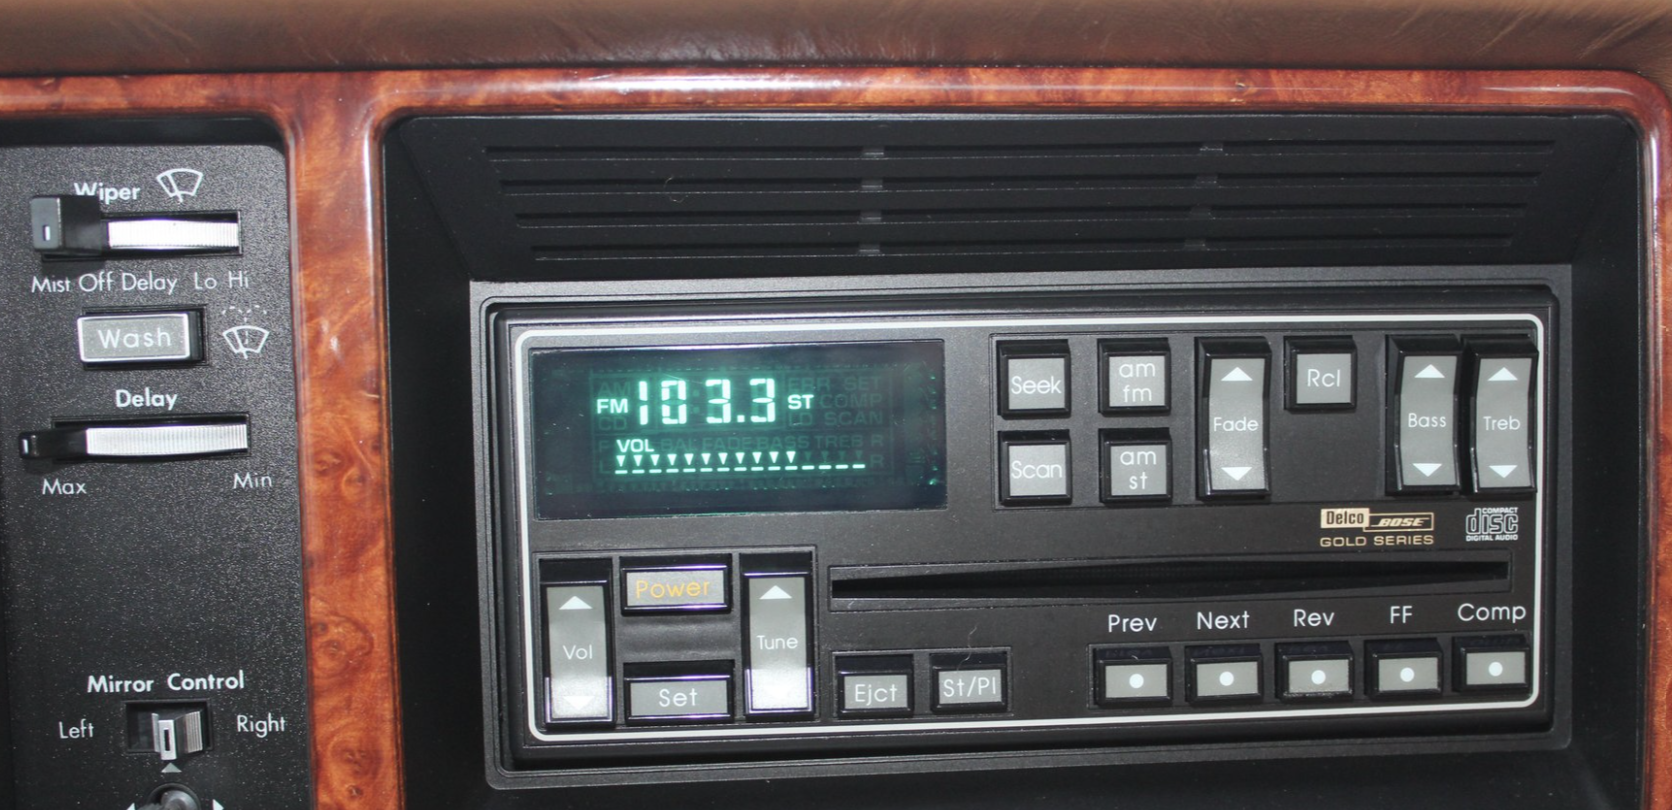 Car Stereo in Dash.png